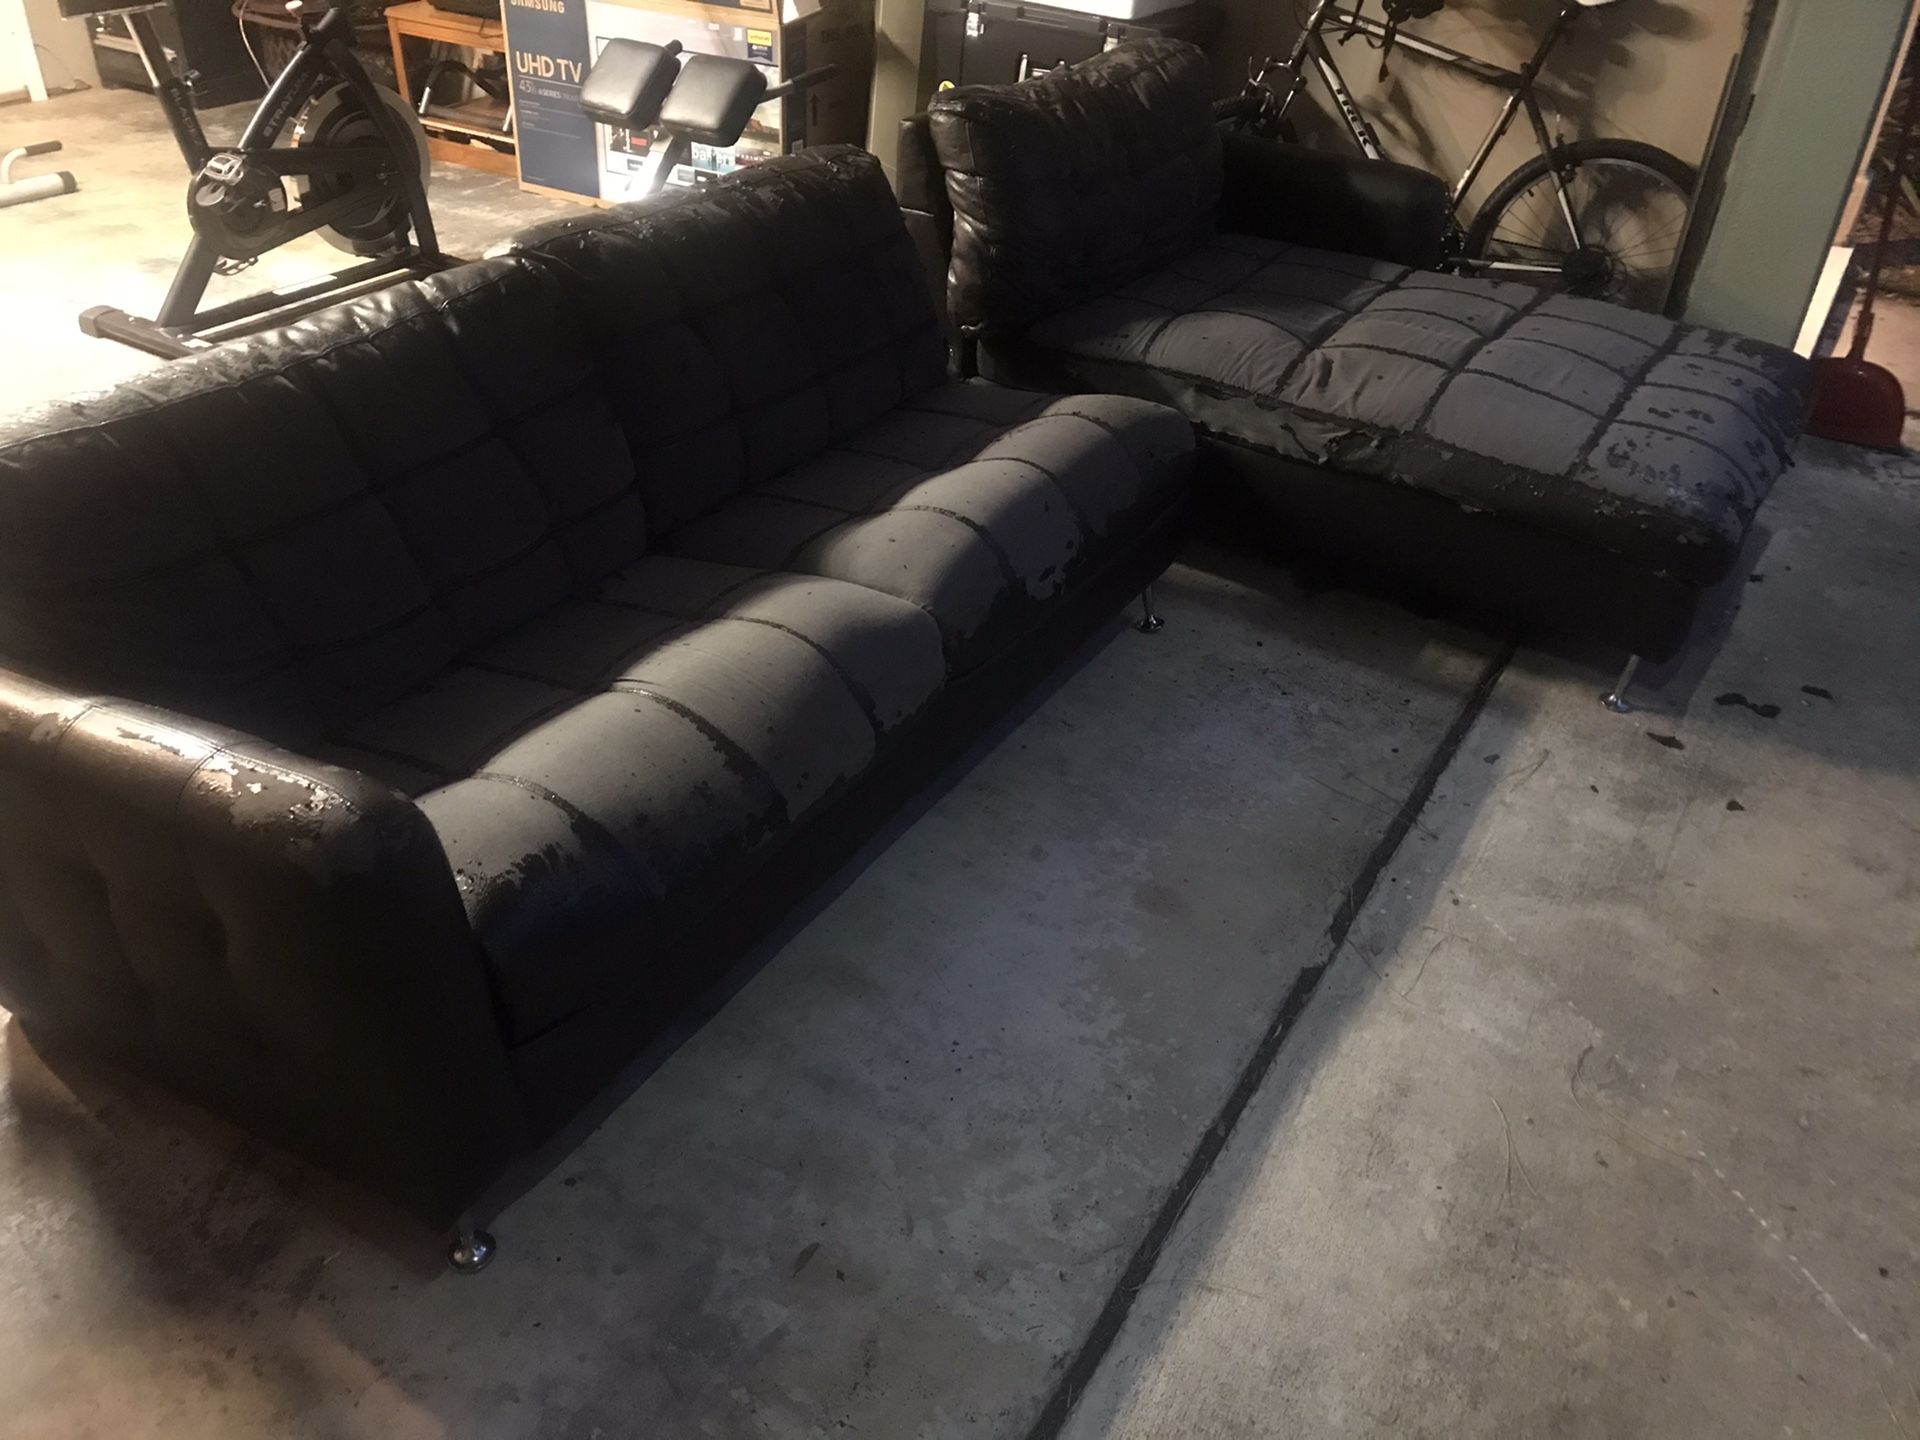 I’ll pay you to haul away this Couch